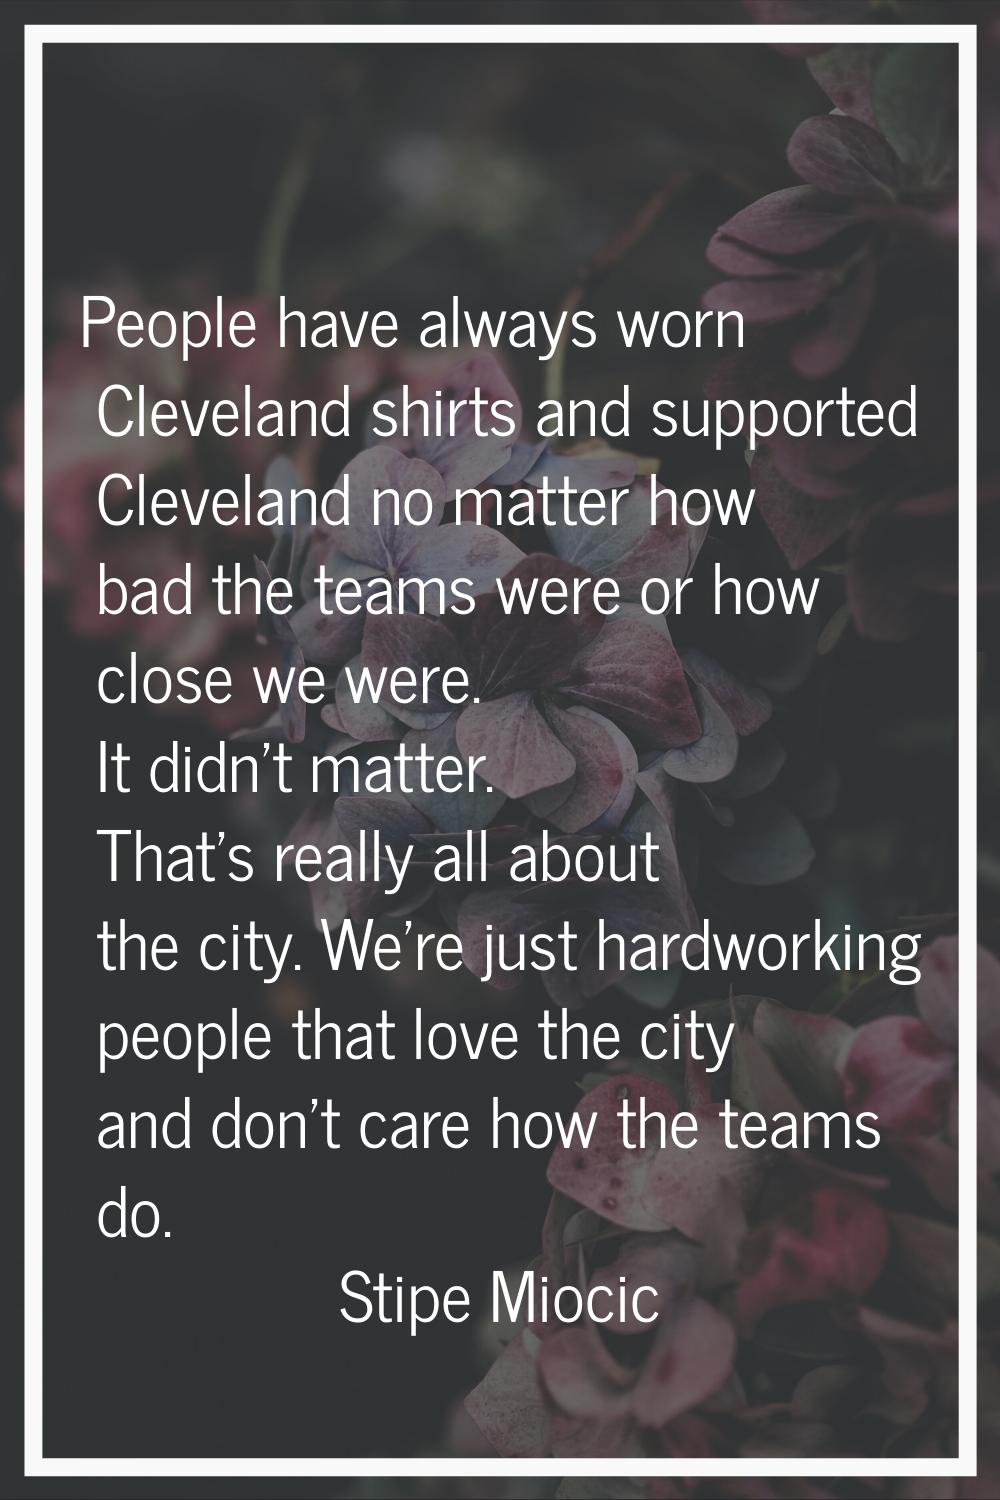 People have always worn Cleveland shirts and supported Cleveland no matter how bad the teams were o